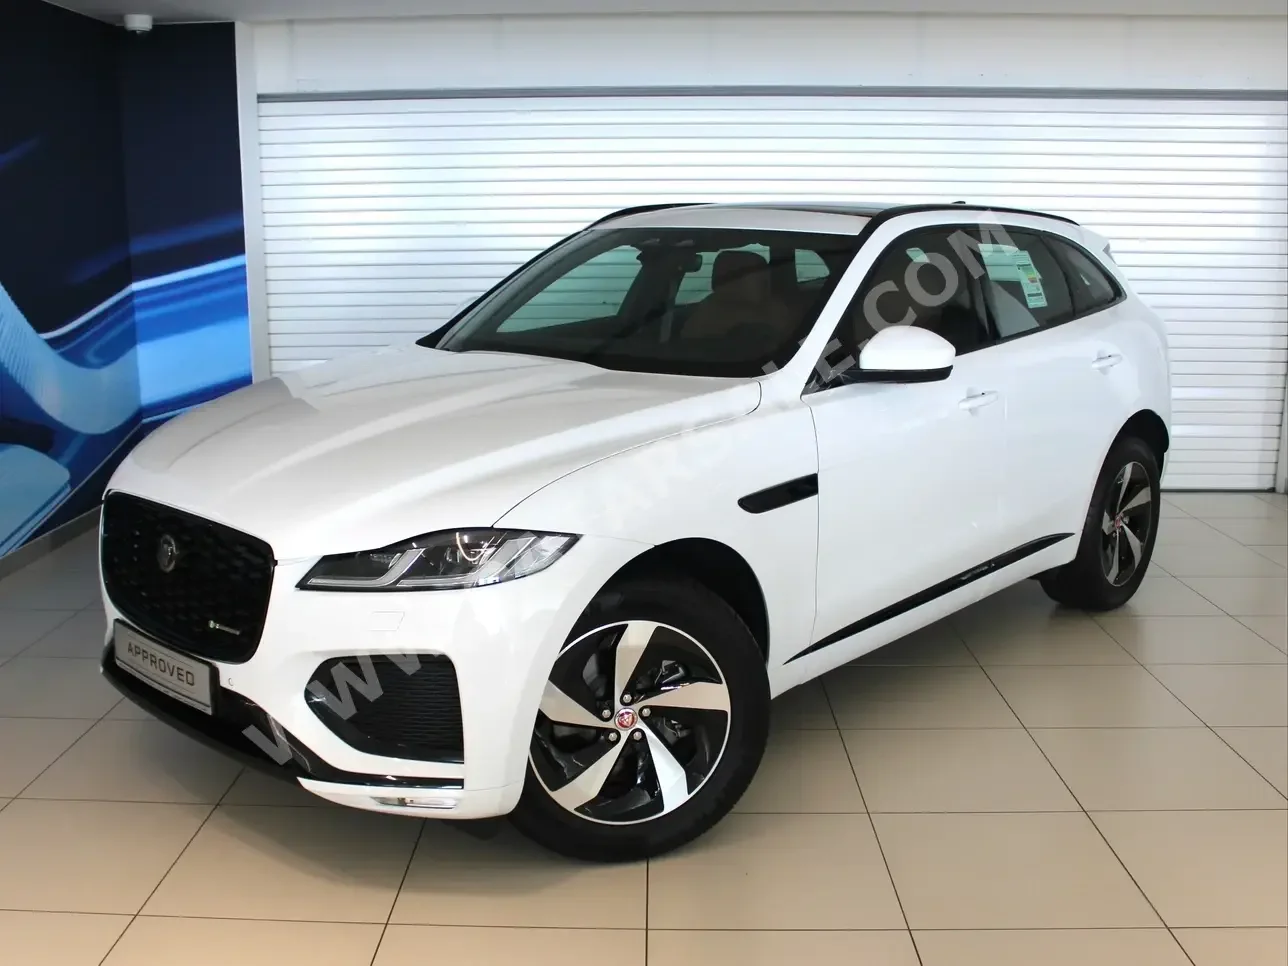 Jaguar  F-Pace  S  2023  Automatic  40 Km  4 Cylinder  Four Wheel Drive (4WD)  SUV  White  With Warranty